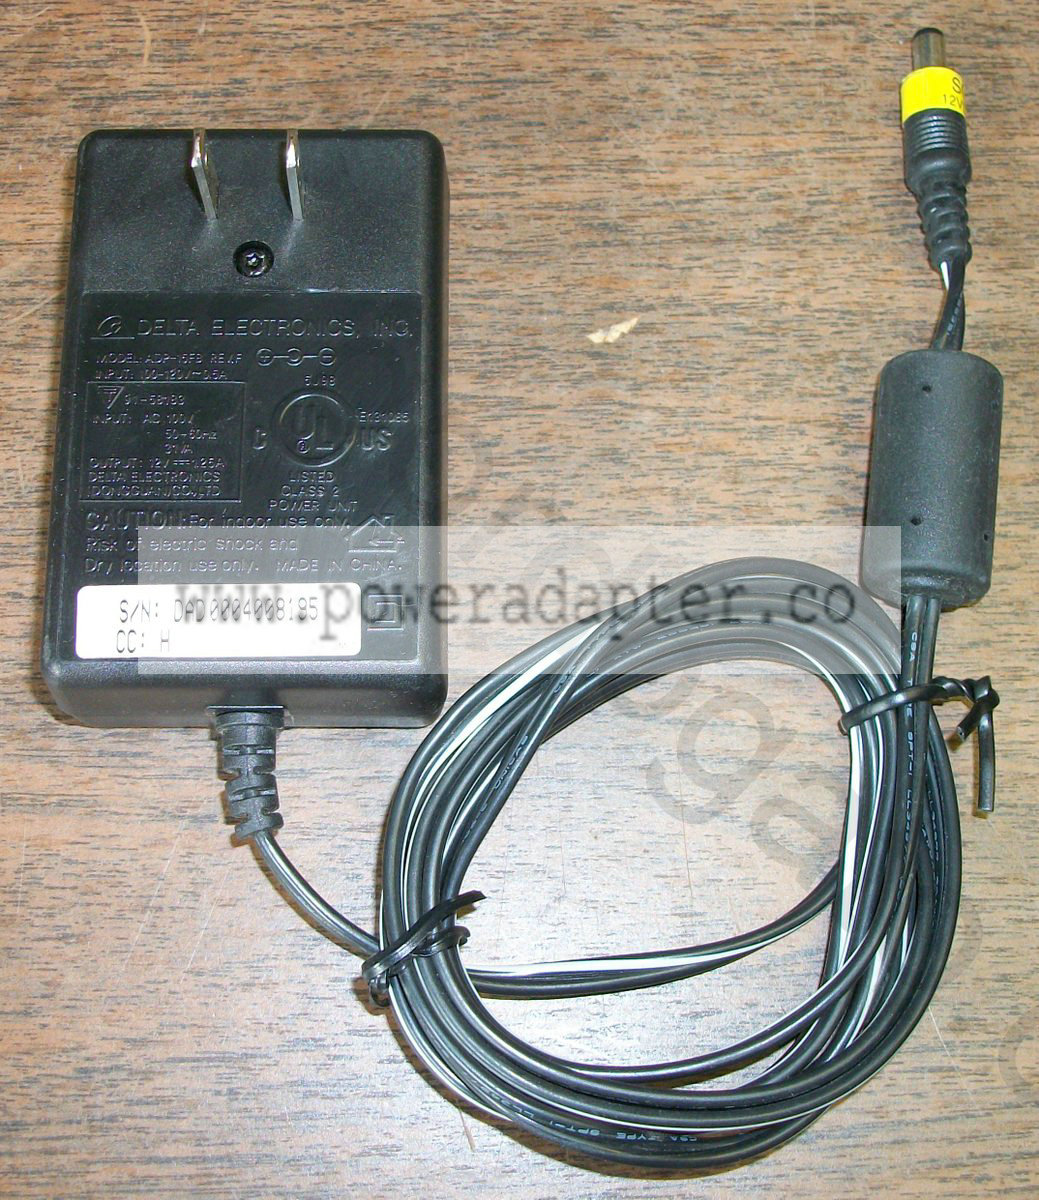 Delta ADP-15FB AC Adapter Power Cable for HP Scanners [ADP-15FB] Input: 100-120V~0.5A 60Hz Output: DC 12V 1.25A This